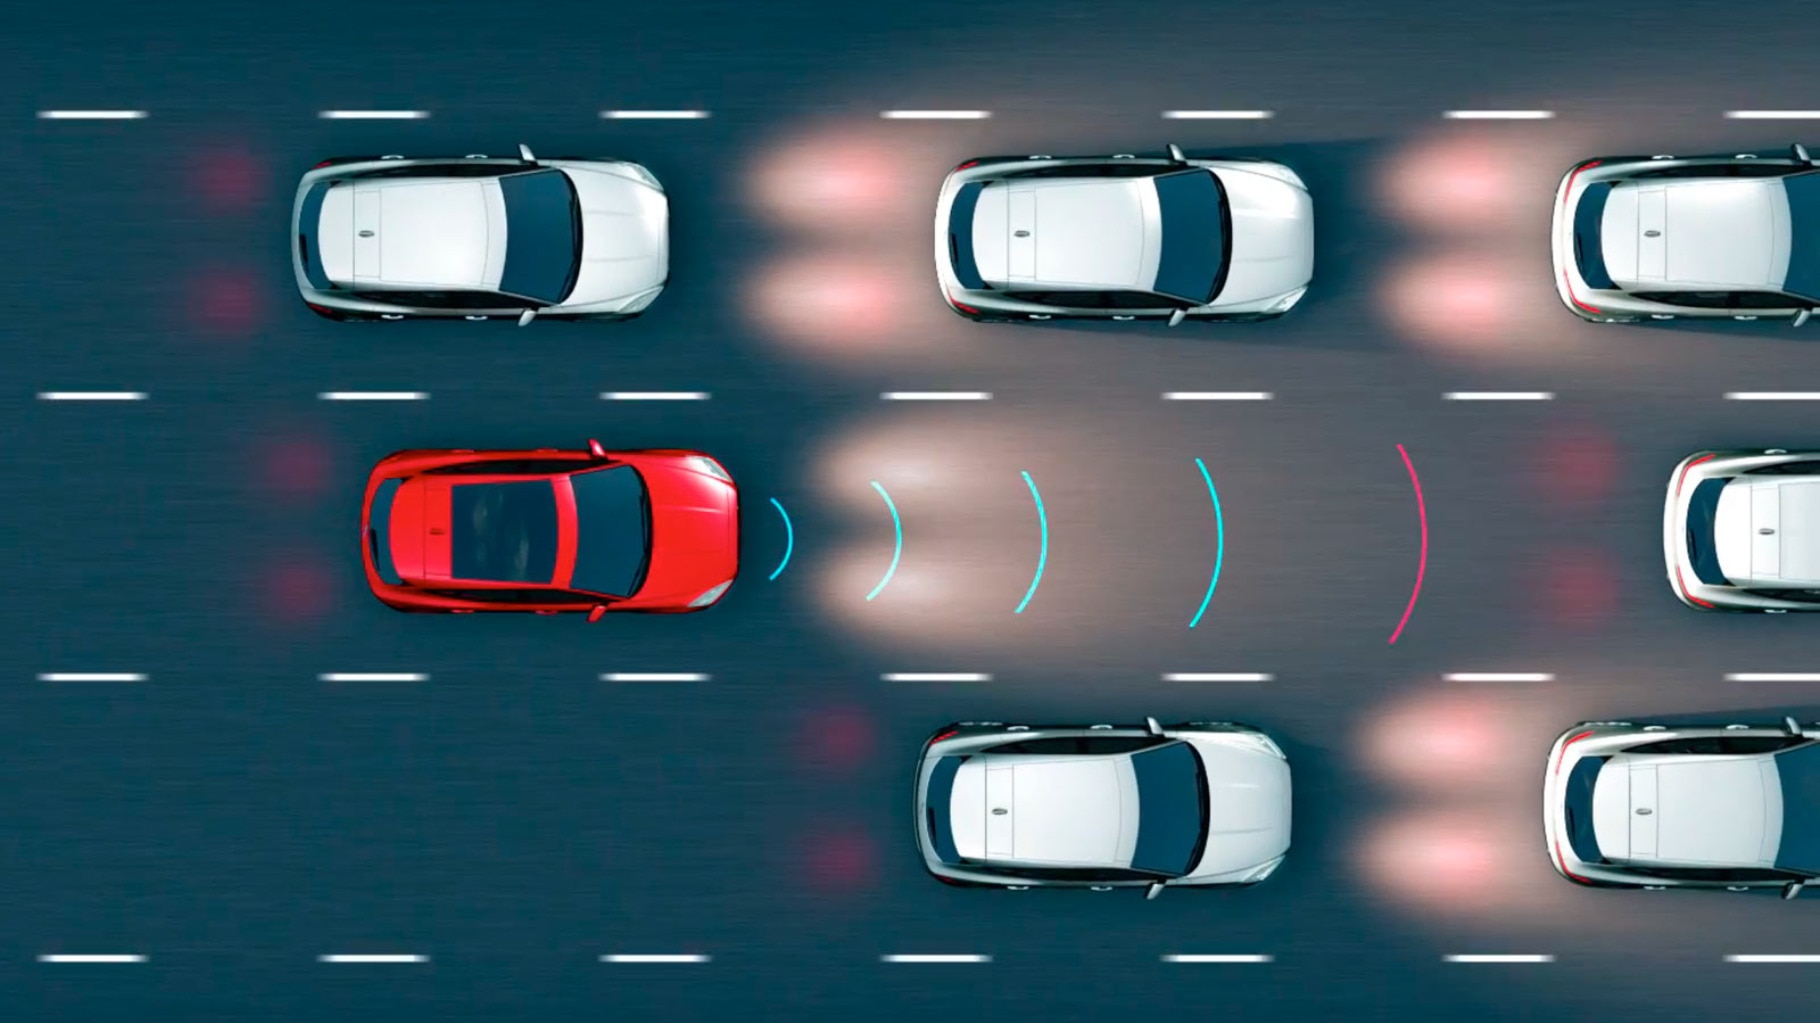 A diagram of the Jaguar E-Pace Adaptive Cruise Control mainting a safe distance from the car in front.